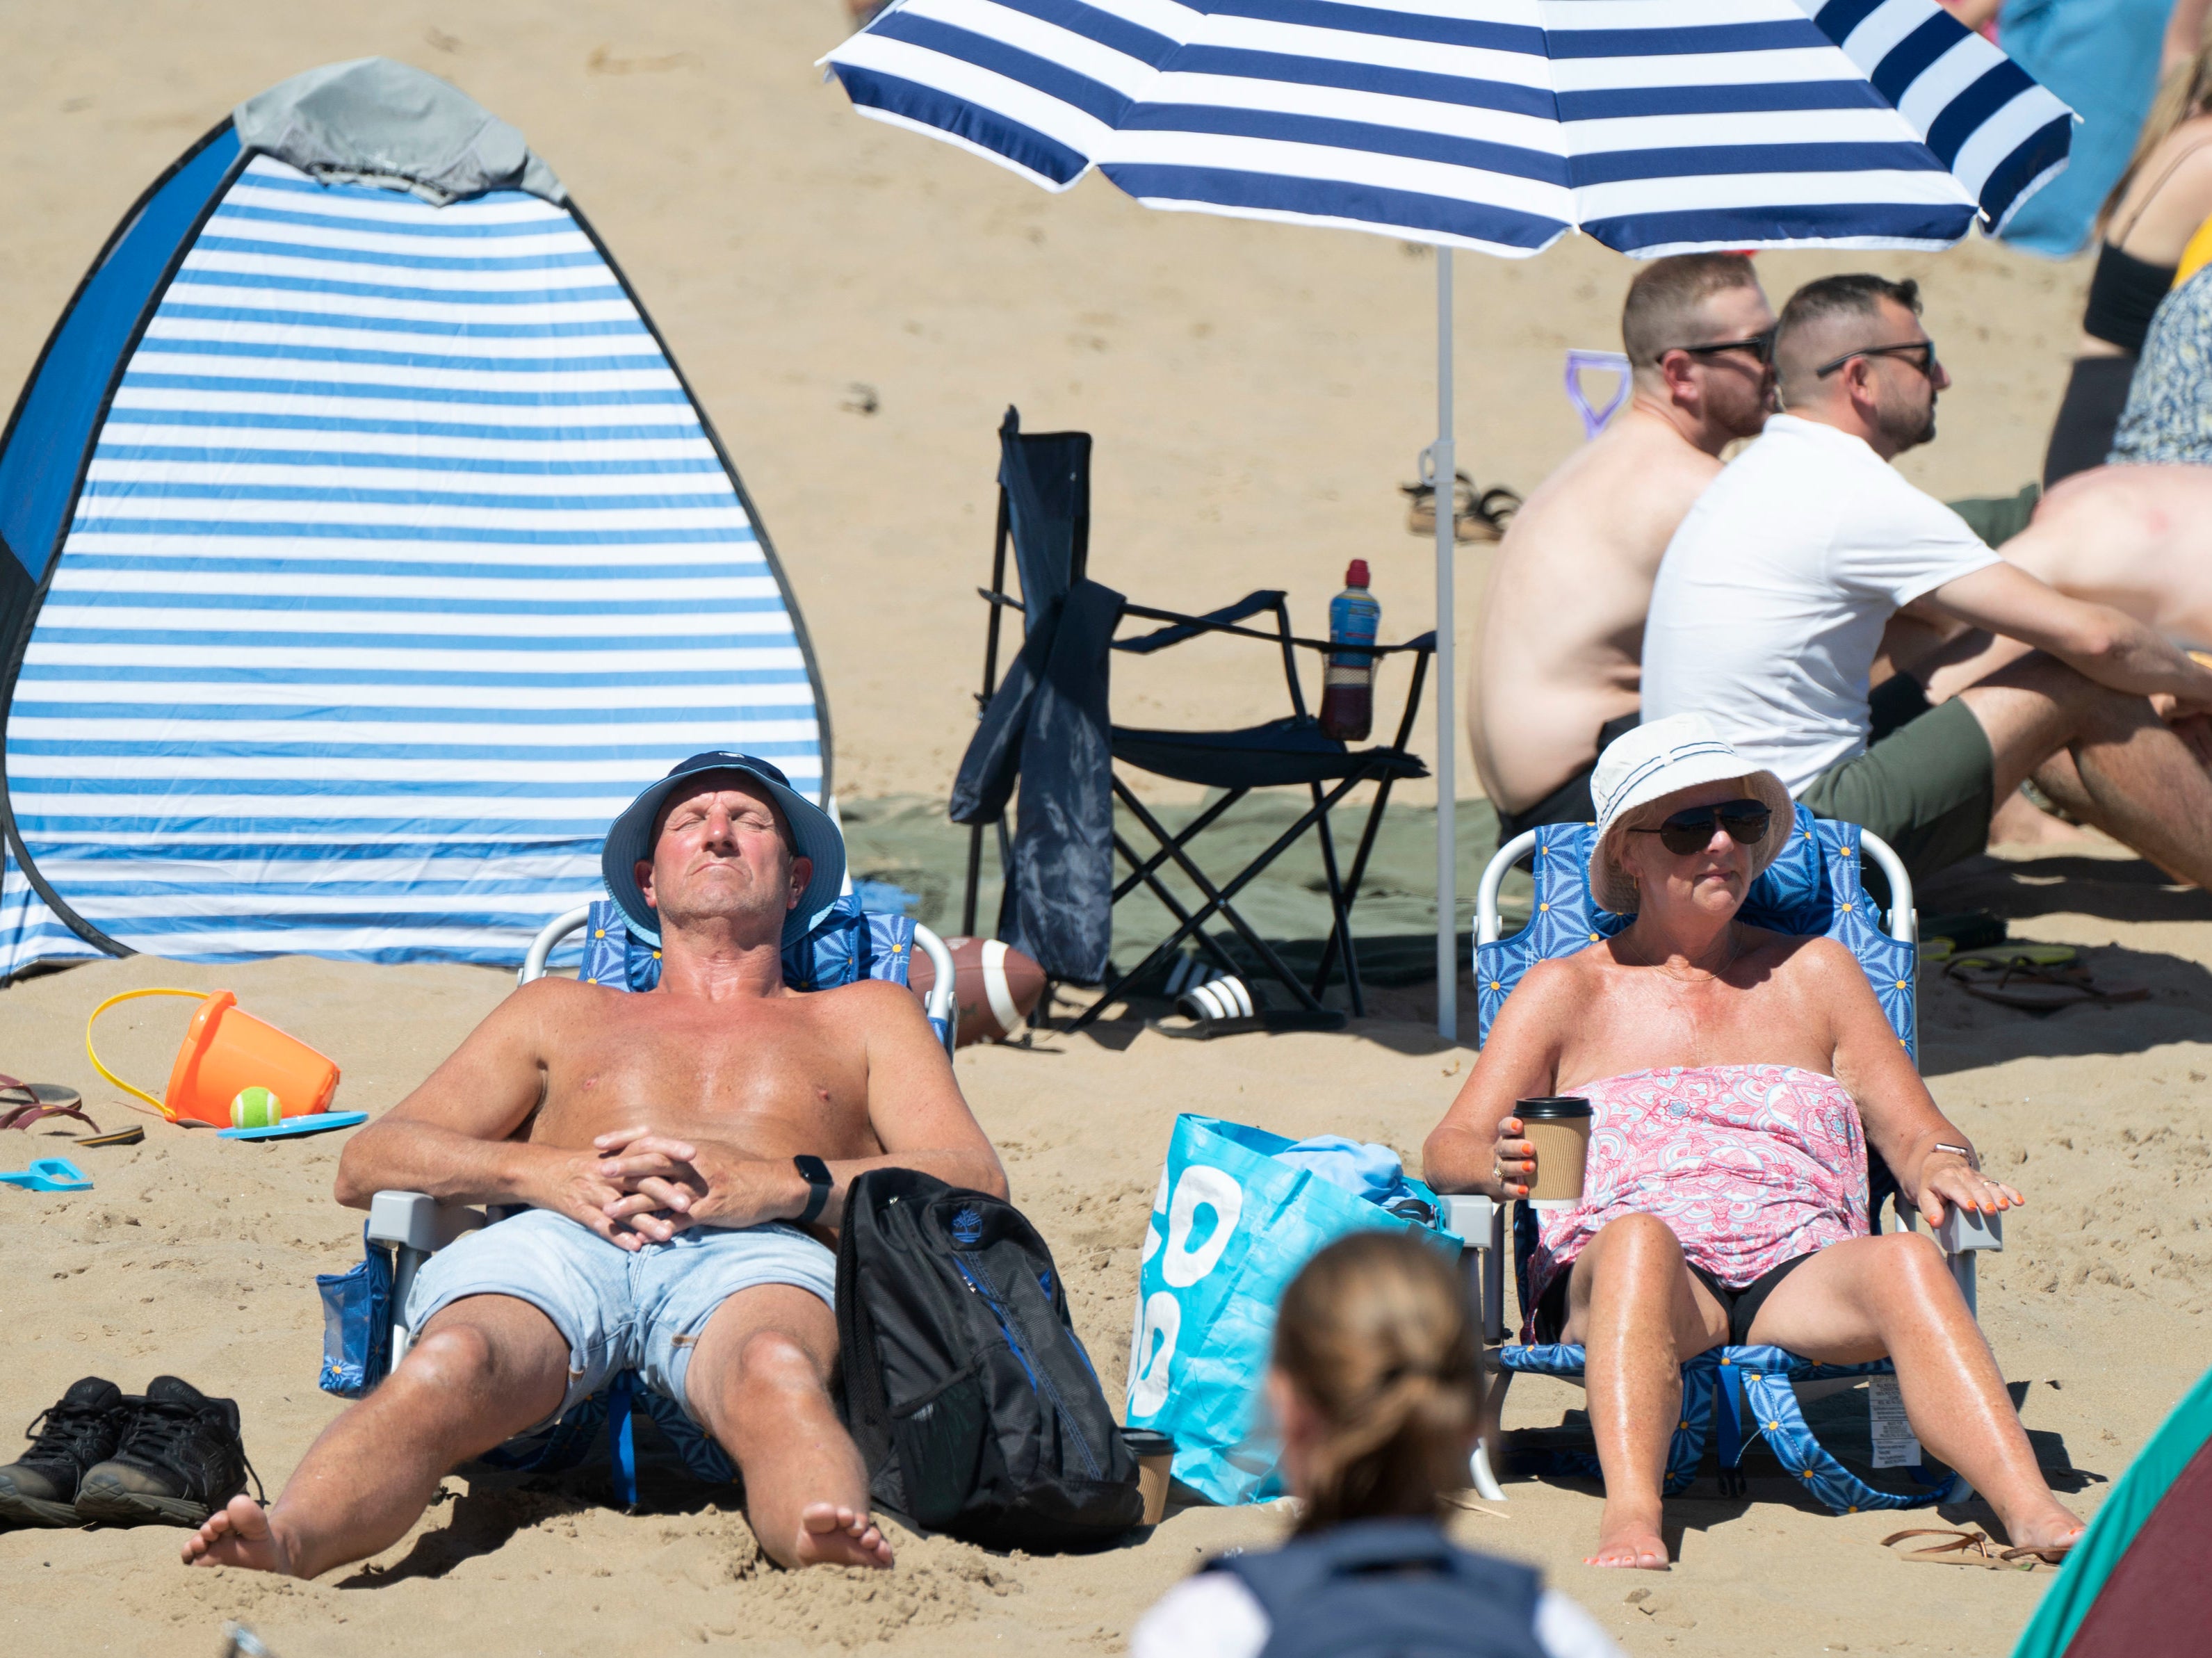 Britons are being urged to ration water as temperatures are expected to soar to 33C